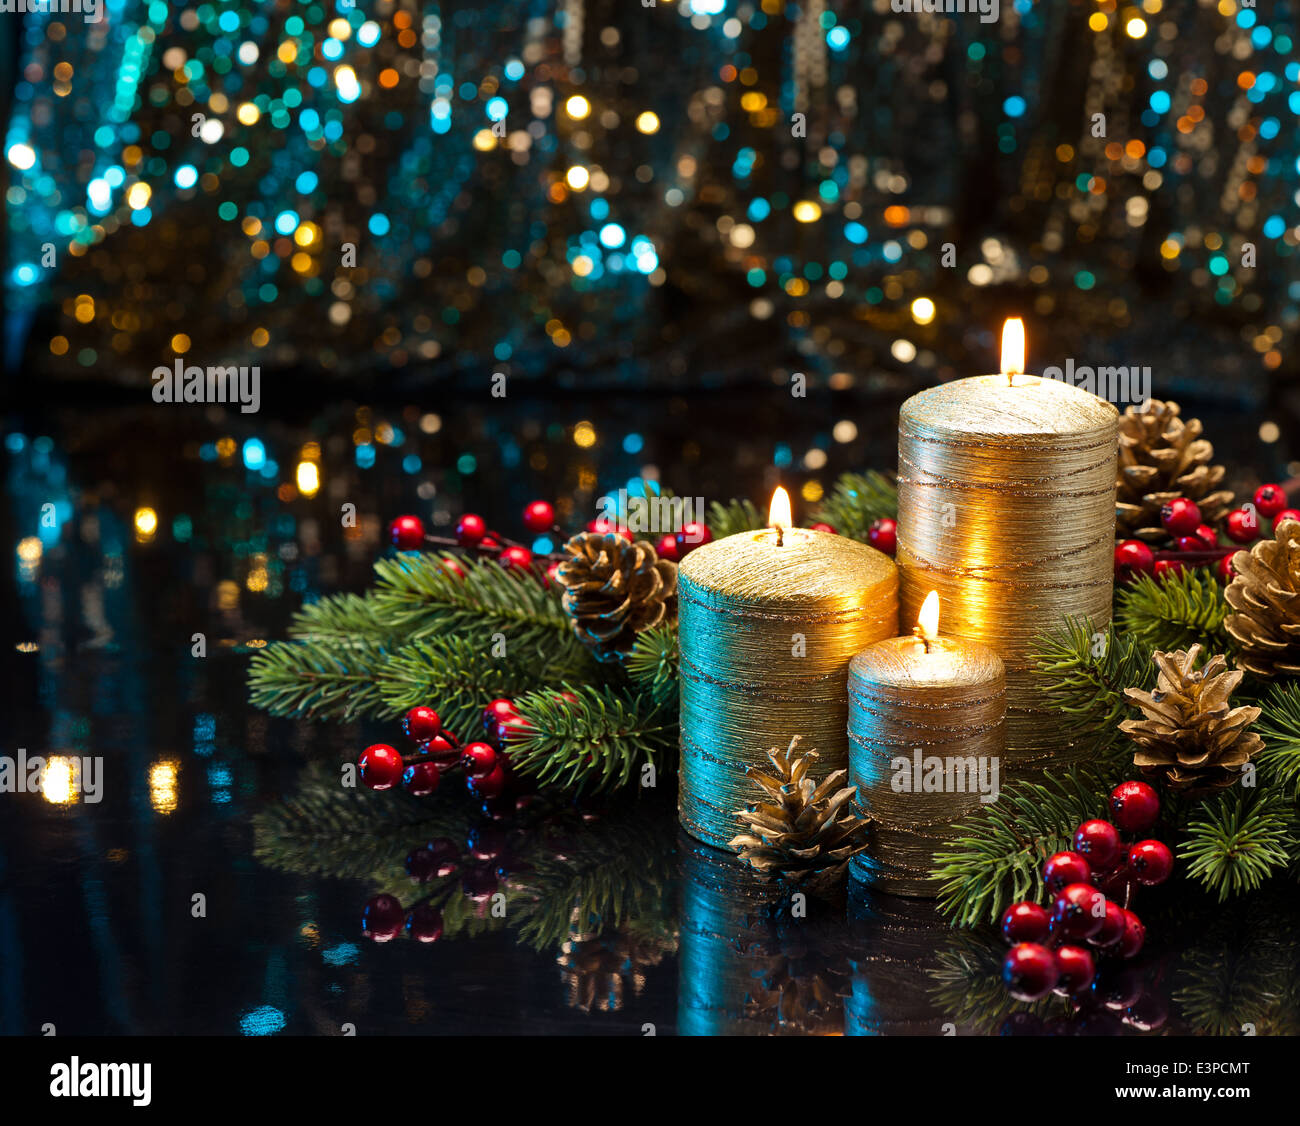 Three golden Candles with Christmas tree branches and pine cones decorated Stock Photo